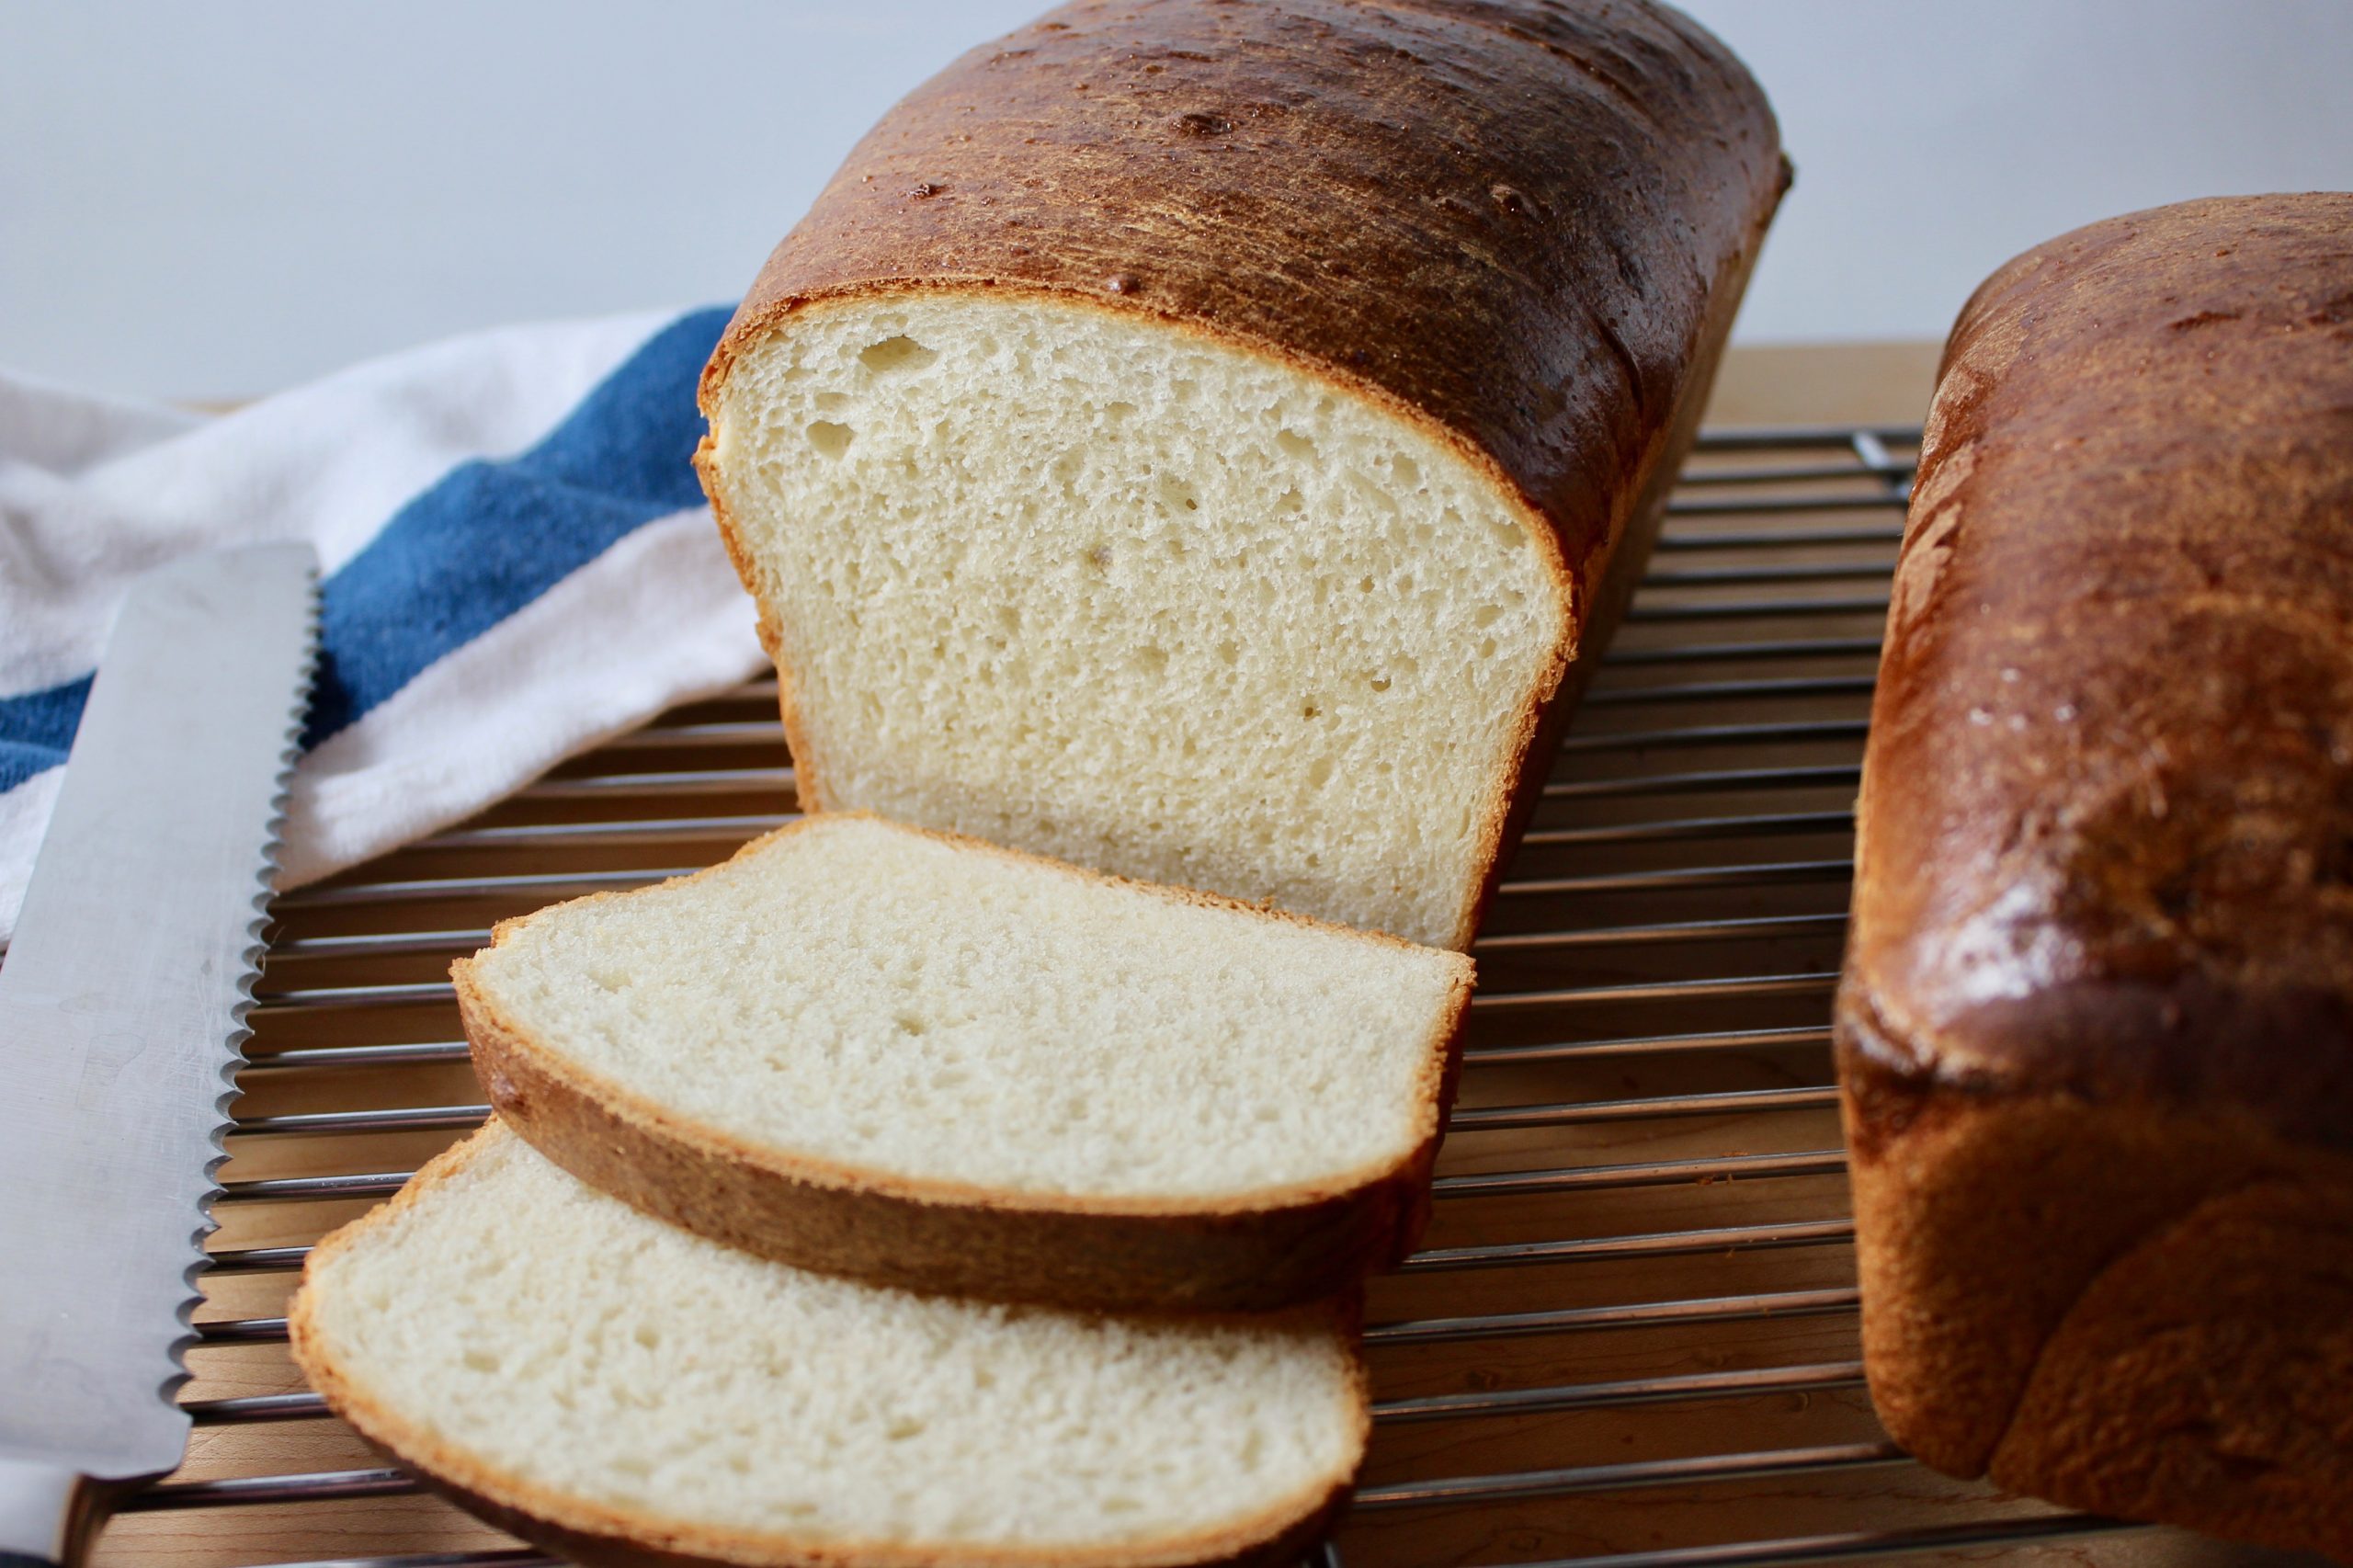 https://www.epicuricloud.com/wp-content/uploads/2020/03/Simple-Homemade-White-Bread-cut-scaled.jpg